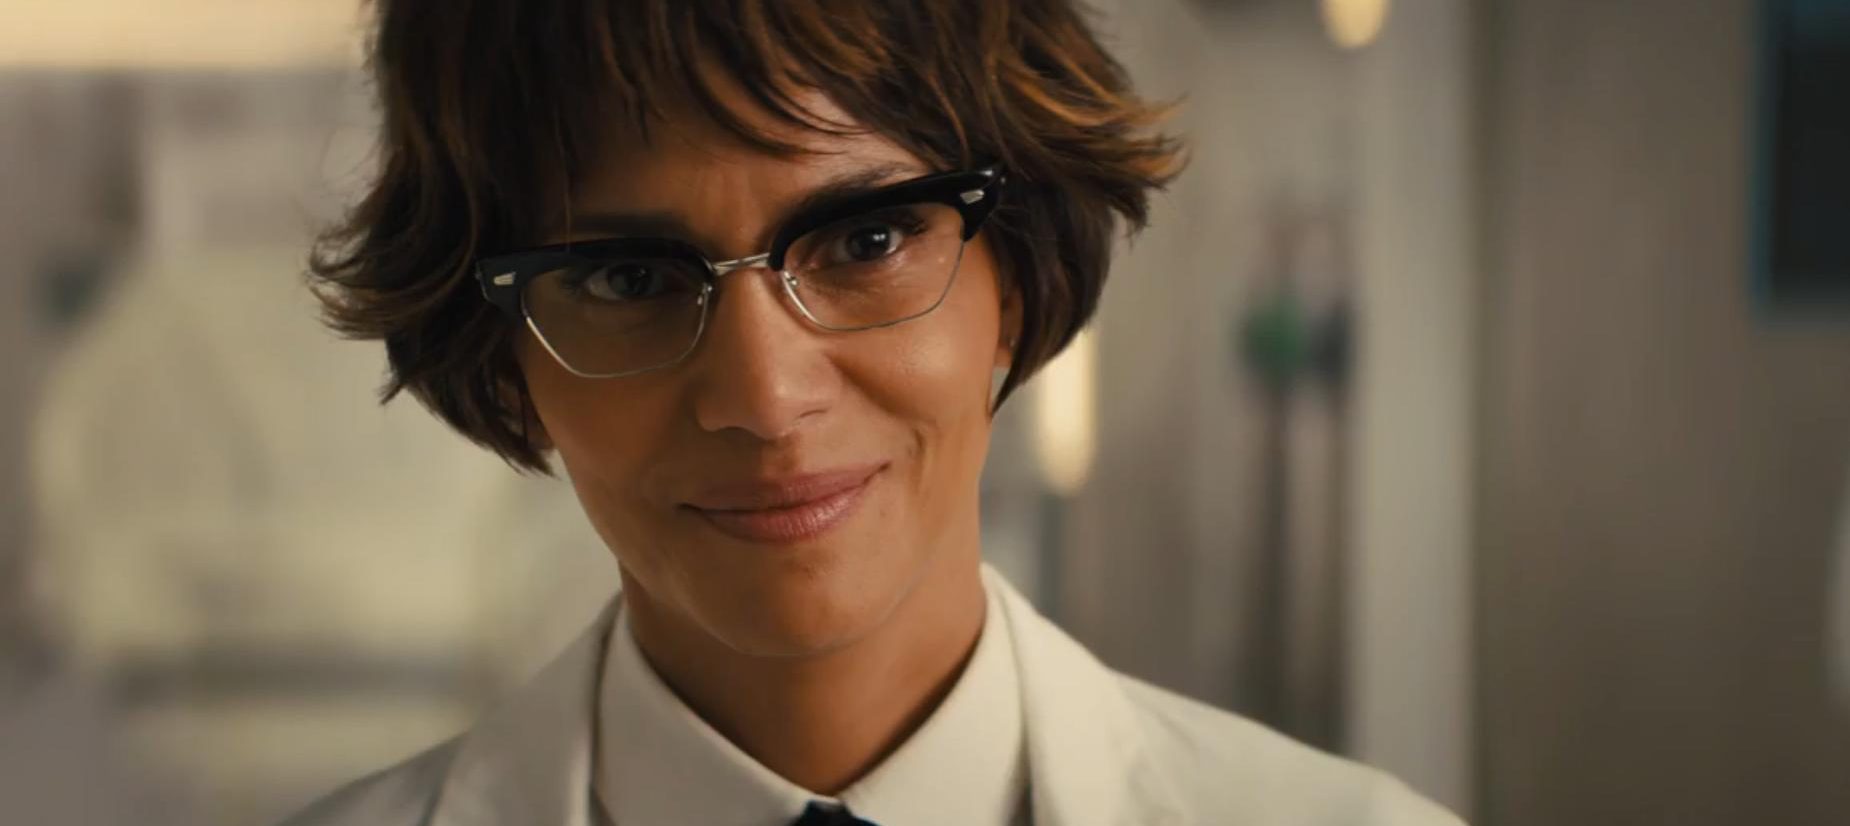 Halle Berry New Movies in 2023 and 2024